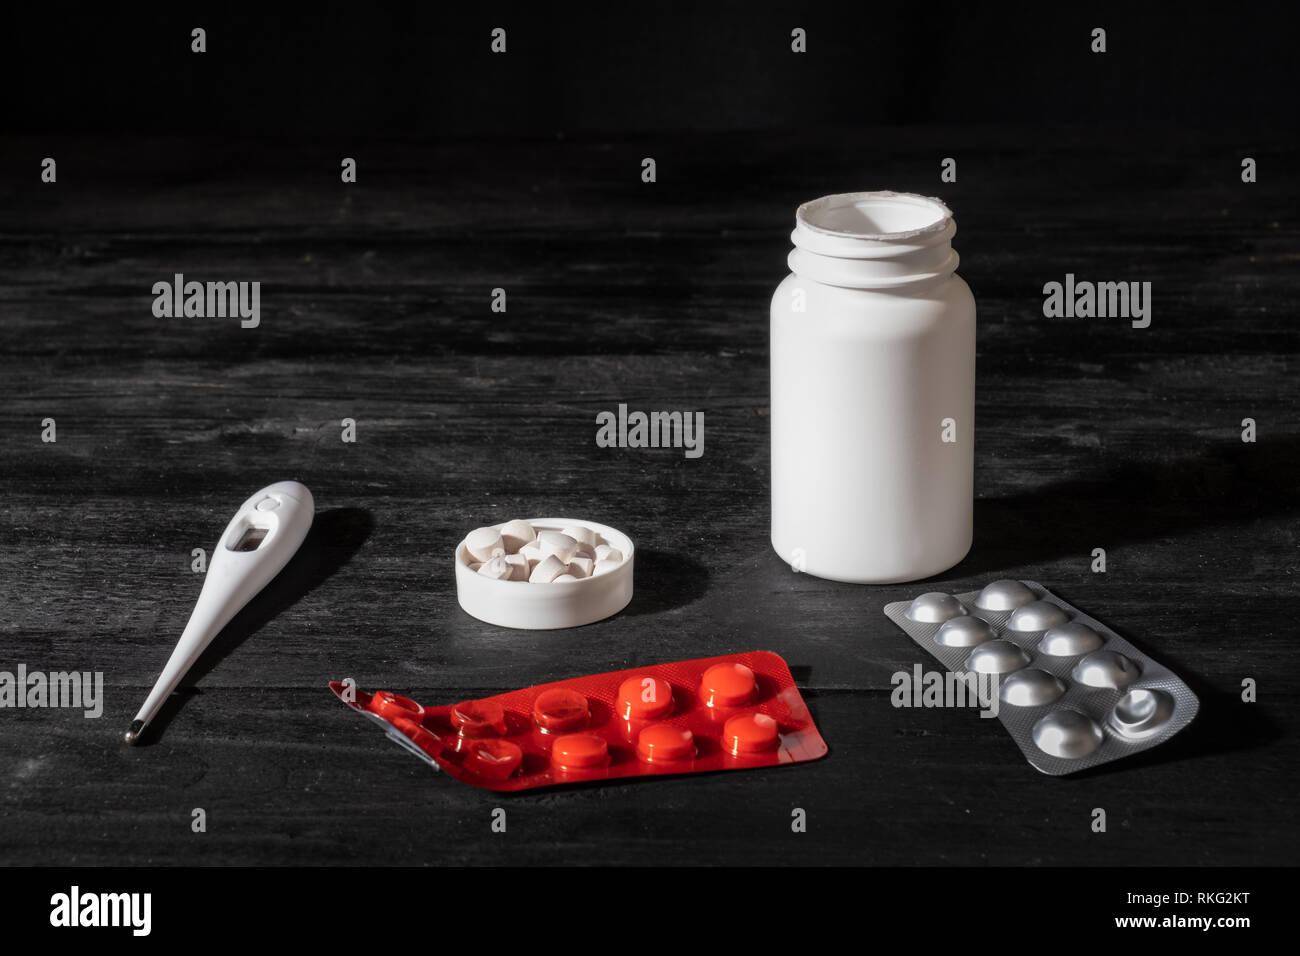 Medical pills and thermometer on black wood background. Self treatment concept: minimalistic low key image of prescription drugs. Stock Photo